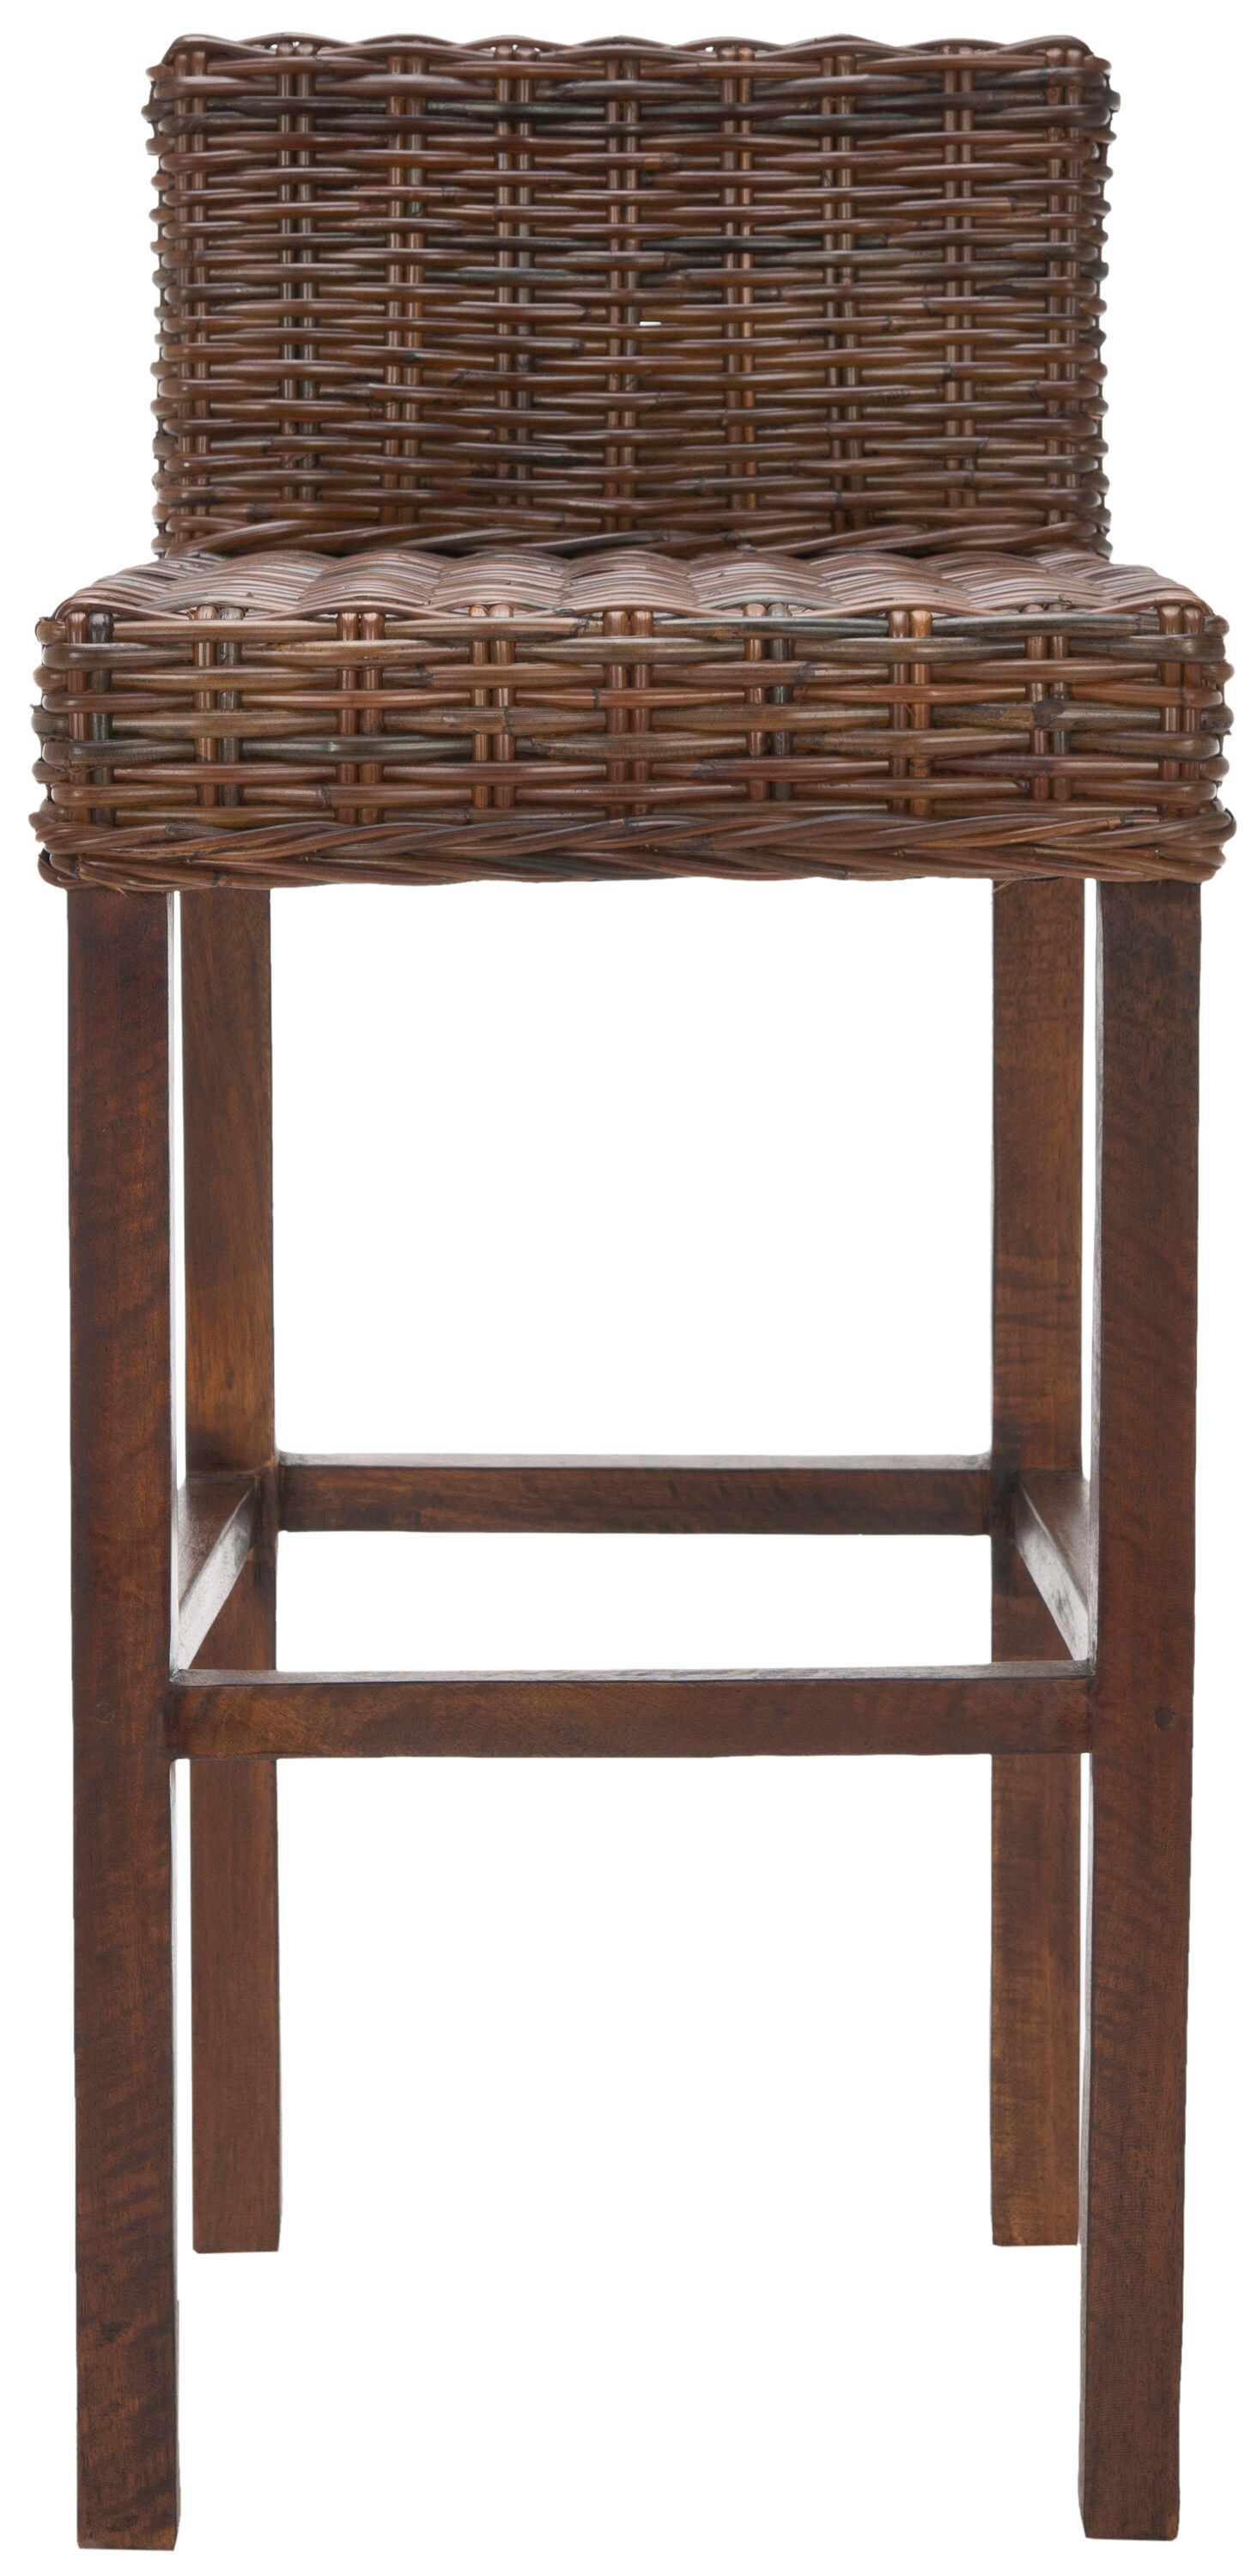 Safavieh Cypress Croco 30-in H Bar height Rattan Bar Stool with Back at ...